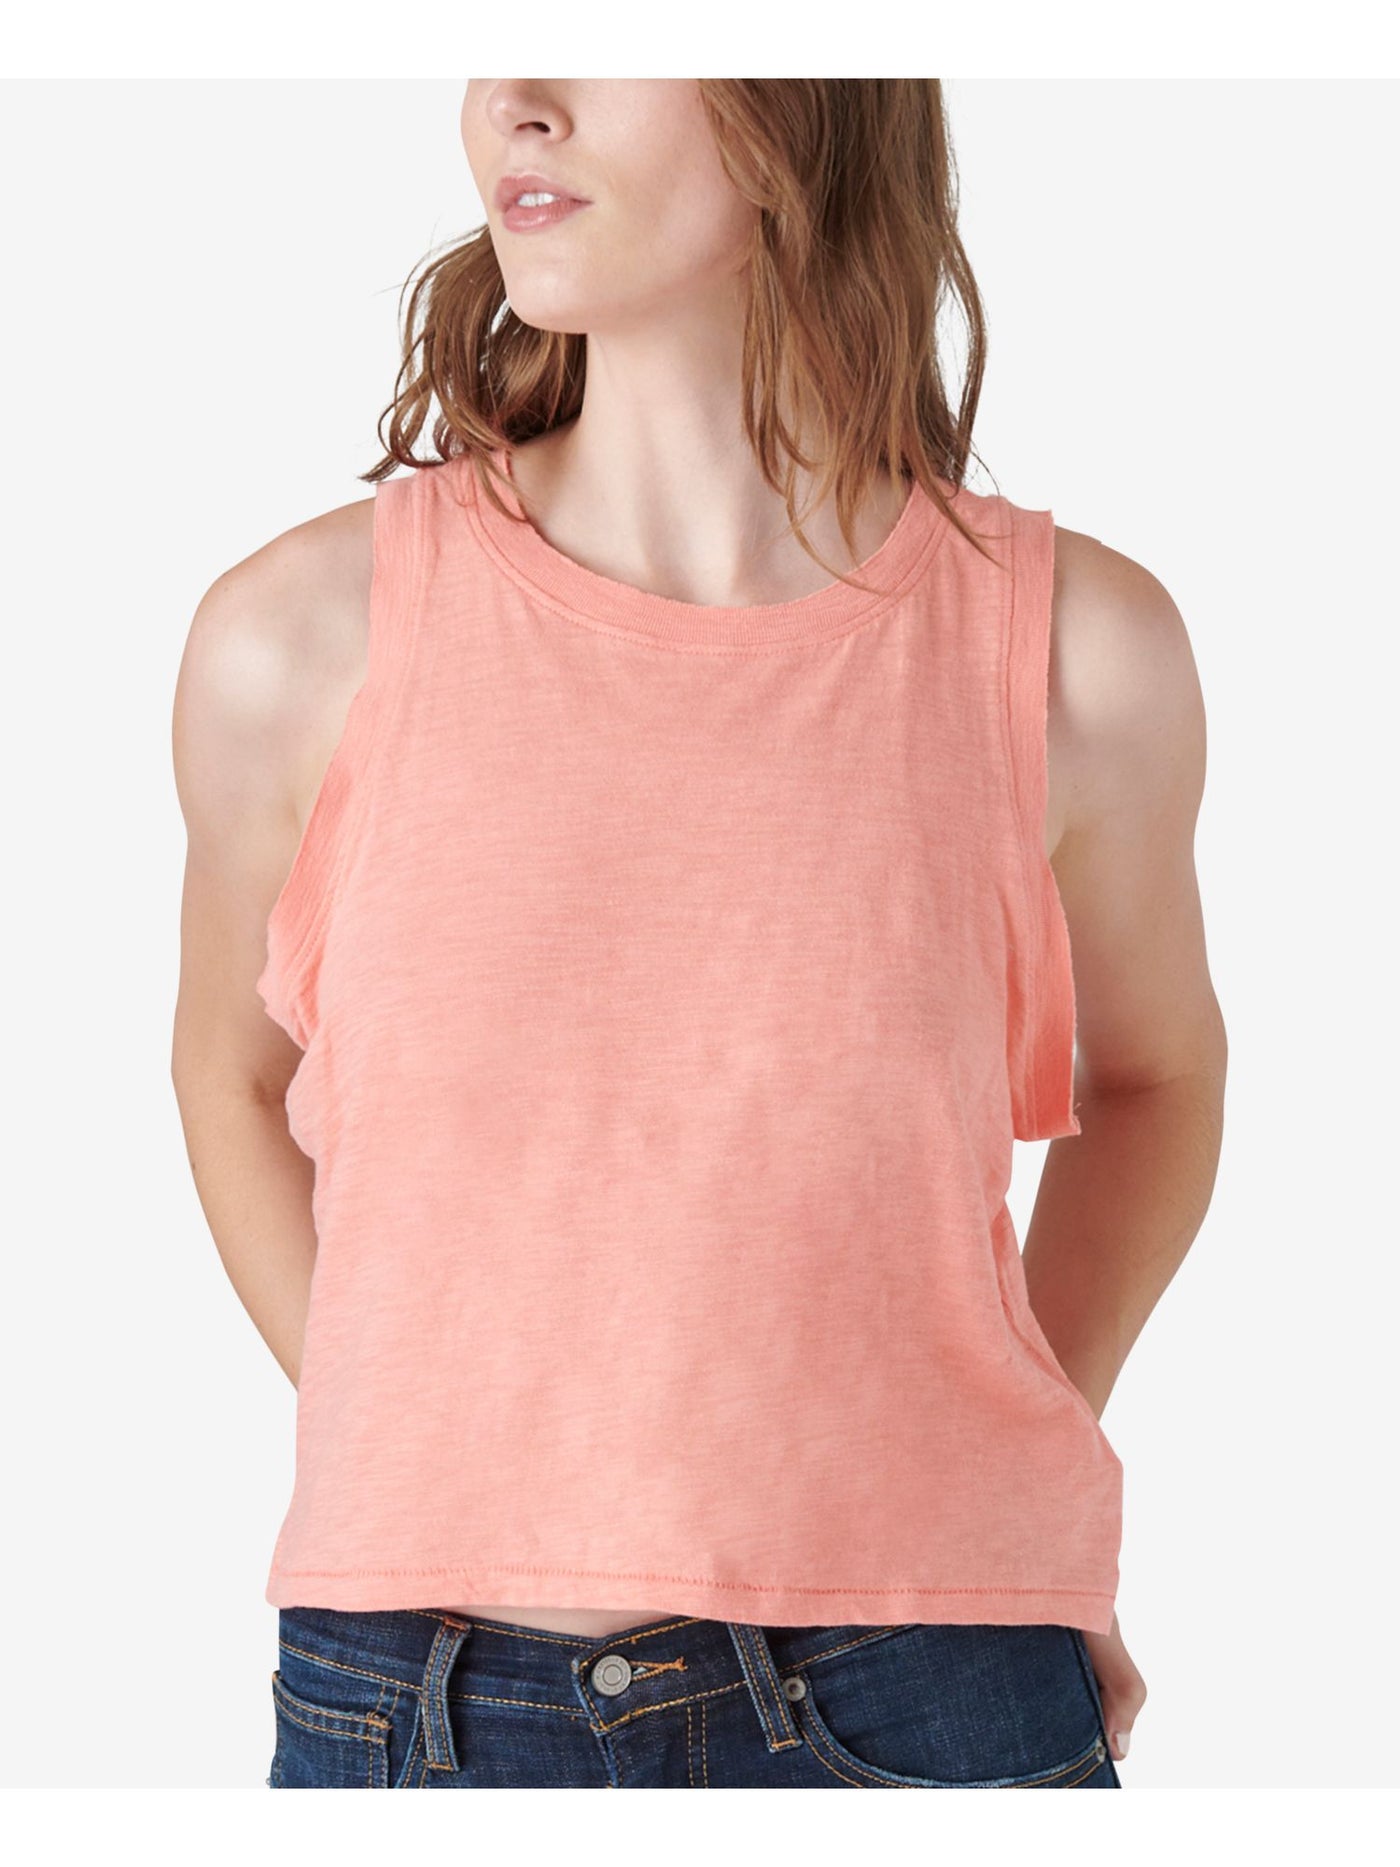 LUCKY BRAND Womens Coral Sleeveless Crew Neck Tank Top L